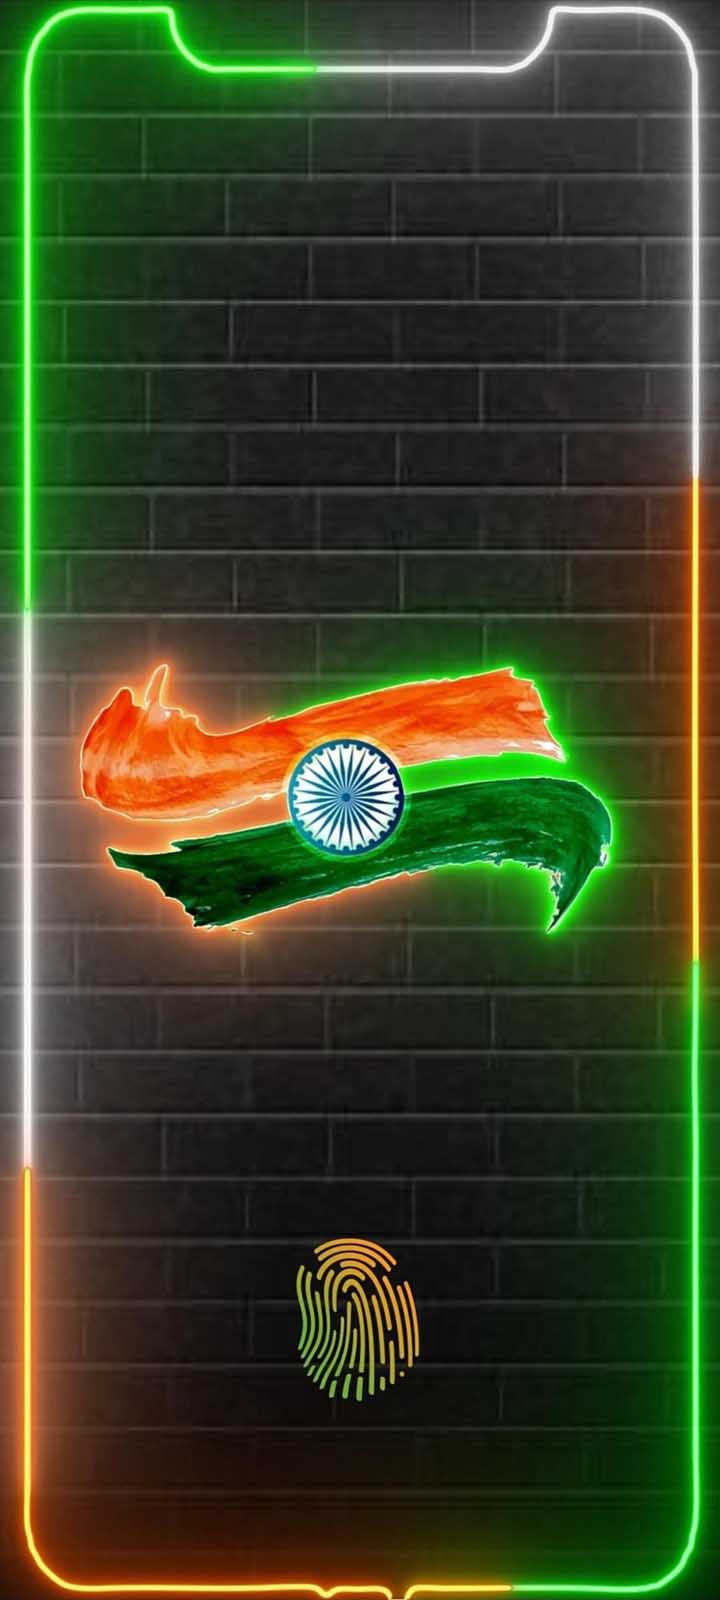 Indian Flag Day IPhone Wallpaper HD - IPhone Wallpapers : iPhone Wallpapers